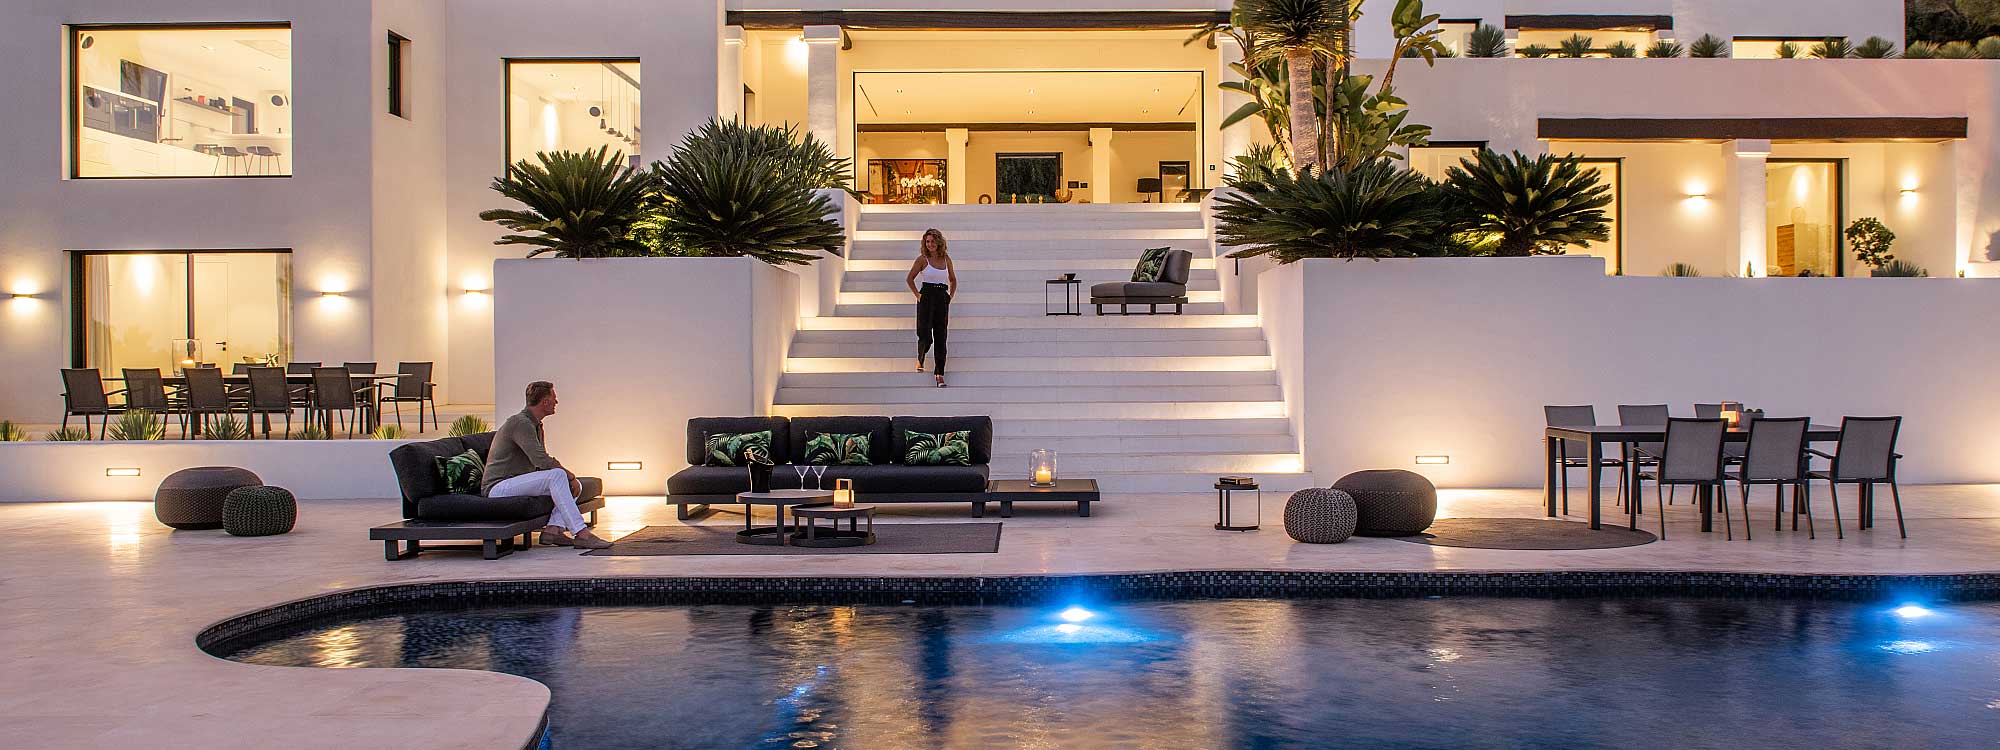 Image of large illuminated night time poolside with man sat on Fano grey garden sofa as woman descends stairs from the house above.